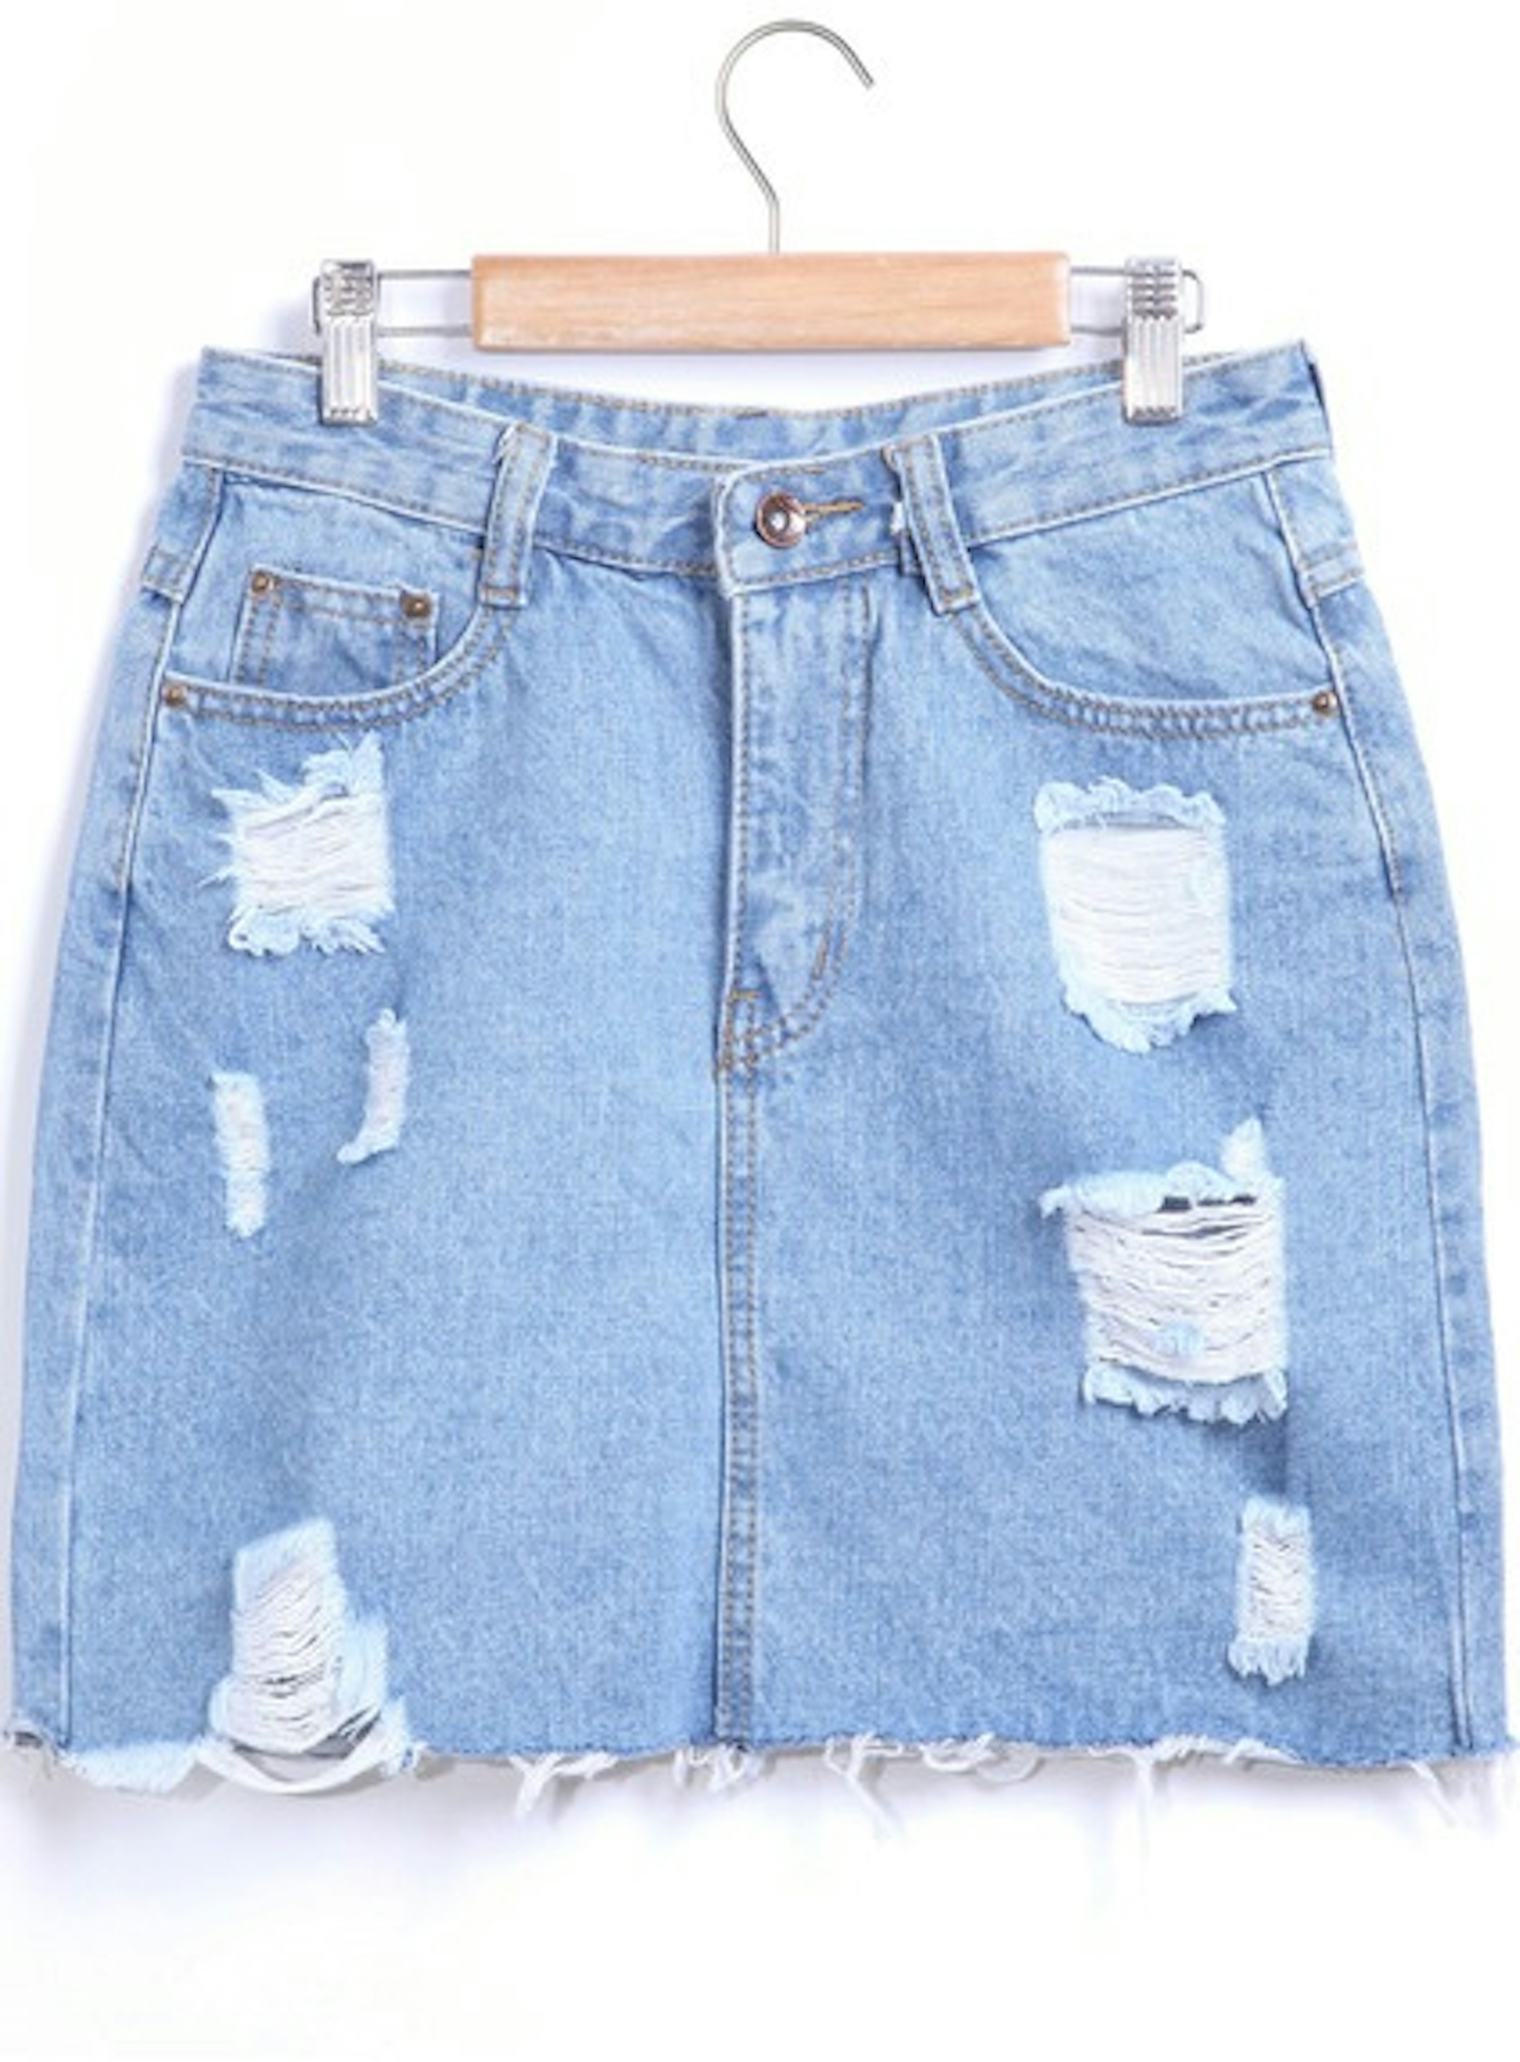 11 Denim Skirts That Are So '90s You'll Feel Like You're In An Episode ...